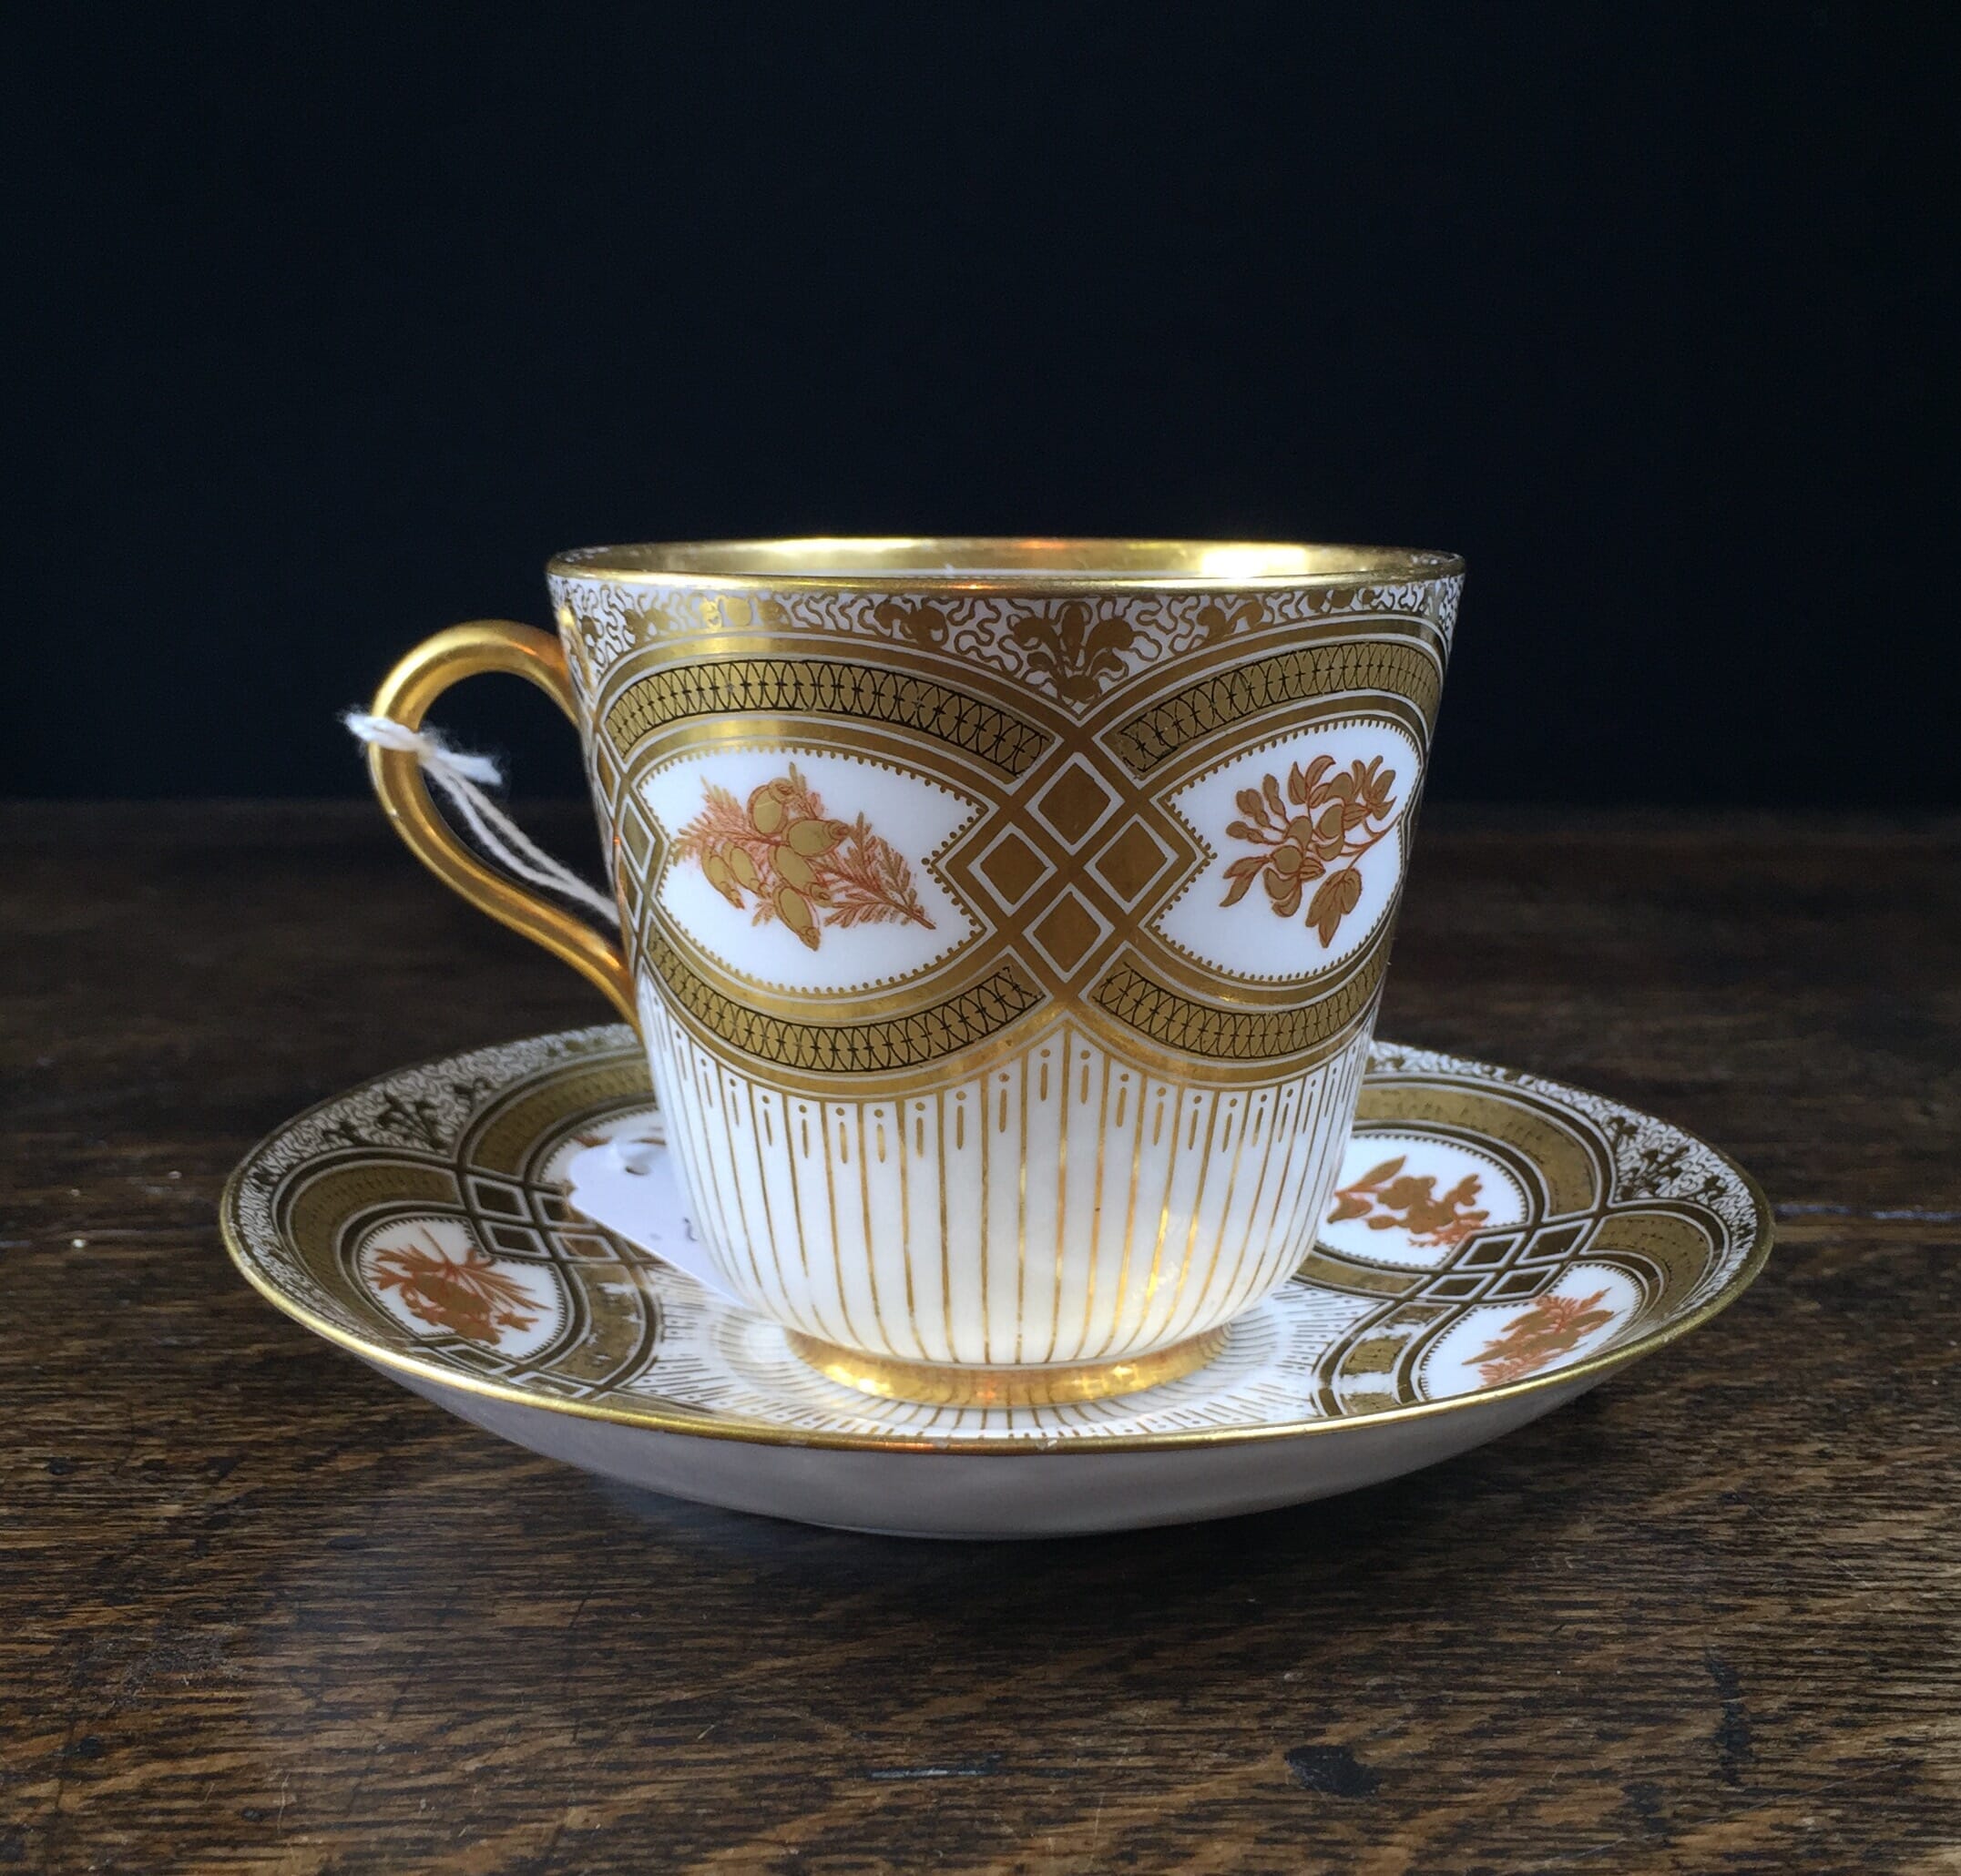 Brown, Westhead, Moore & Co cup & saucer, richly gilt, c.1865 -0